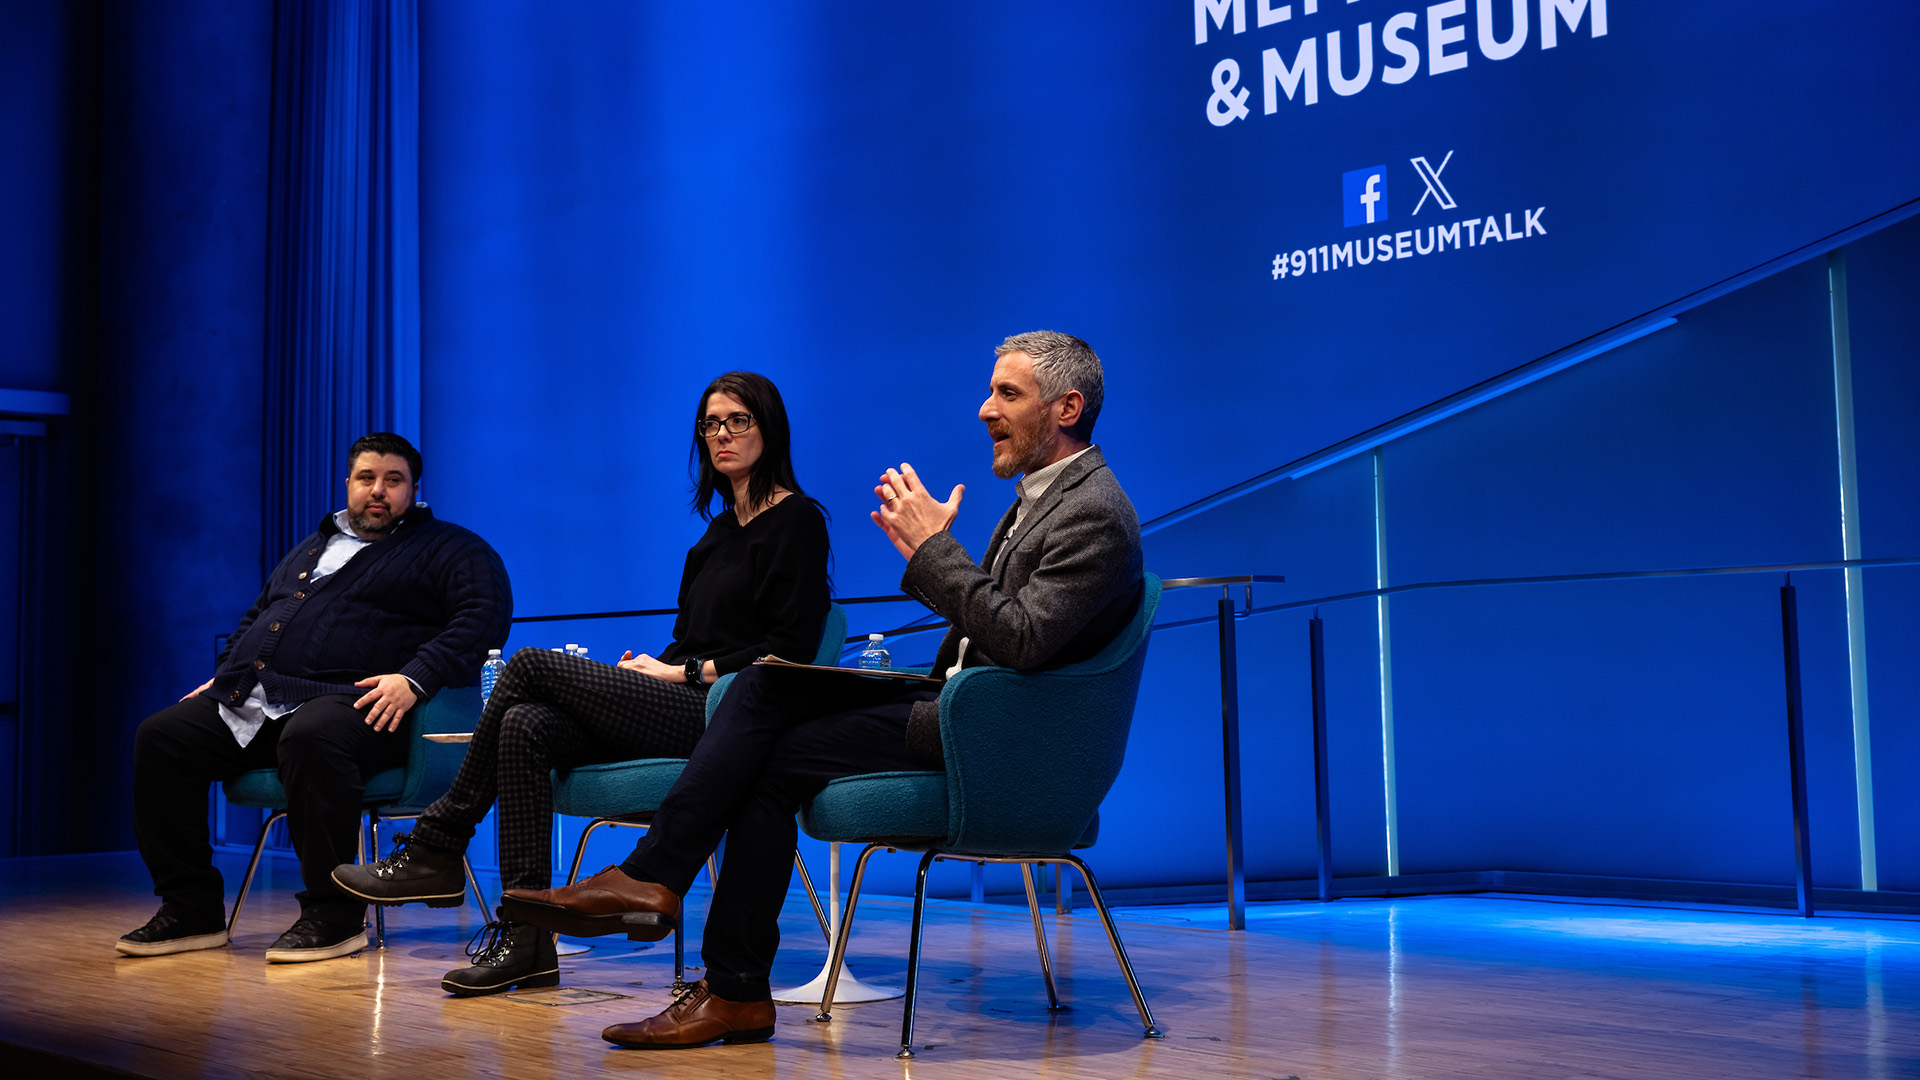 Three speakers, sitting on stage against a blue background displaying the 9/11 Memorial and Museum logo.